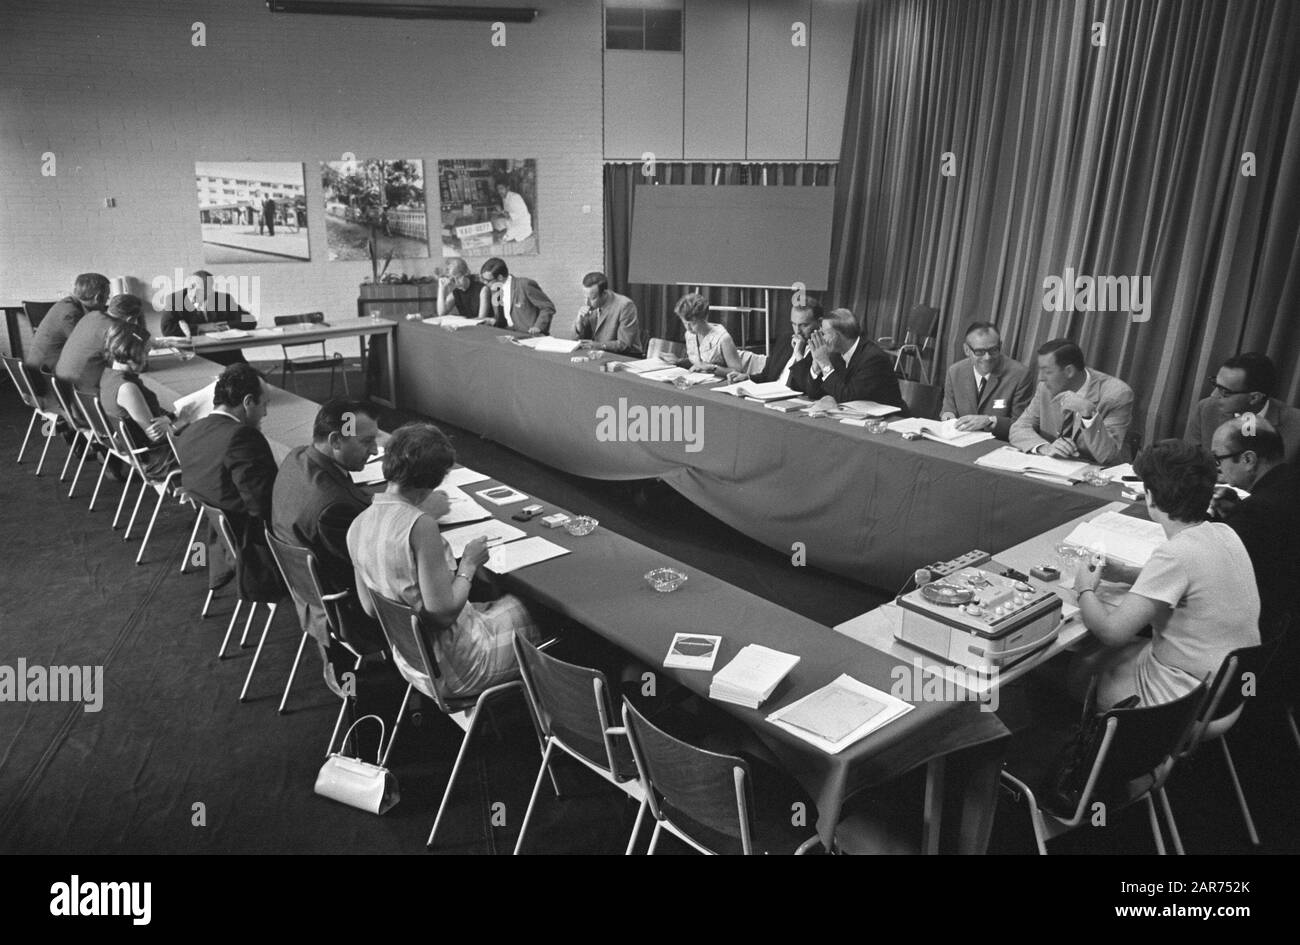 Foreign Affairs Assignment, afd. Information Development Assistance, hr. The Great Date: September 12, 1969 Keywords: DEVELOPMENCE Personal name: hr. De Groot Stock Photo